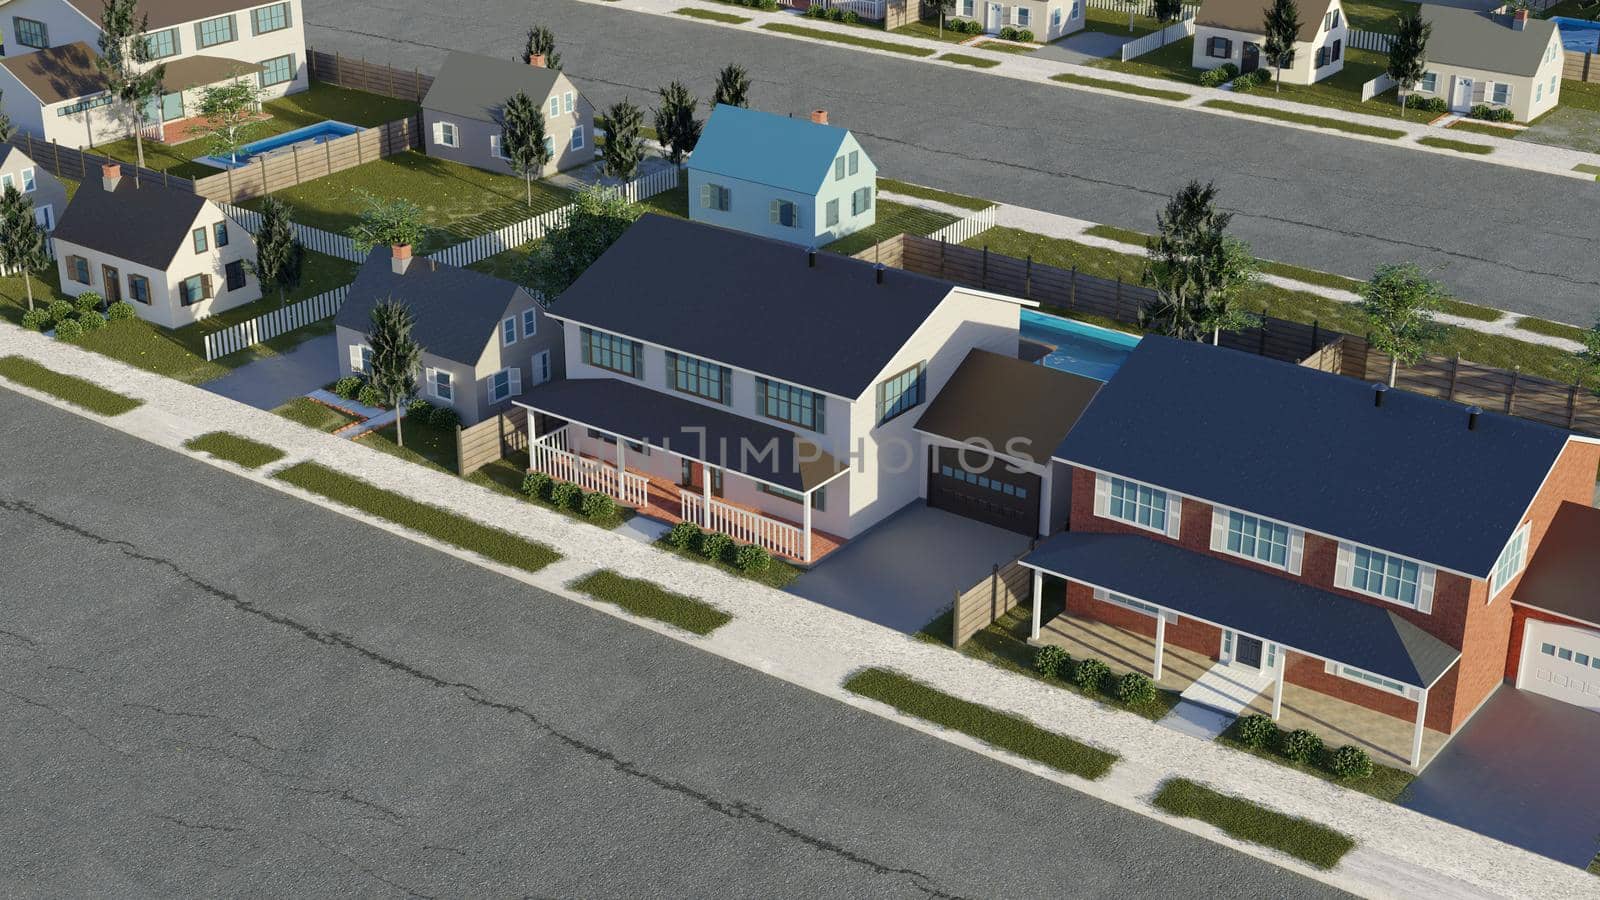 Large fancy houses in a high income neighborhood. Suburban real estate investment. Digital 3D render.